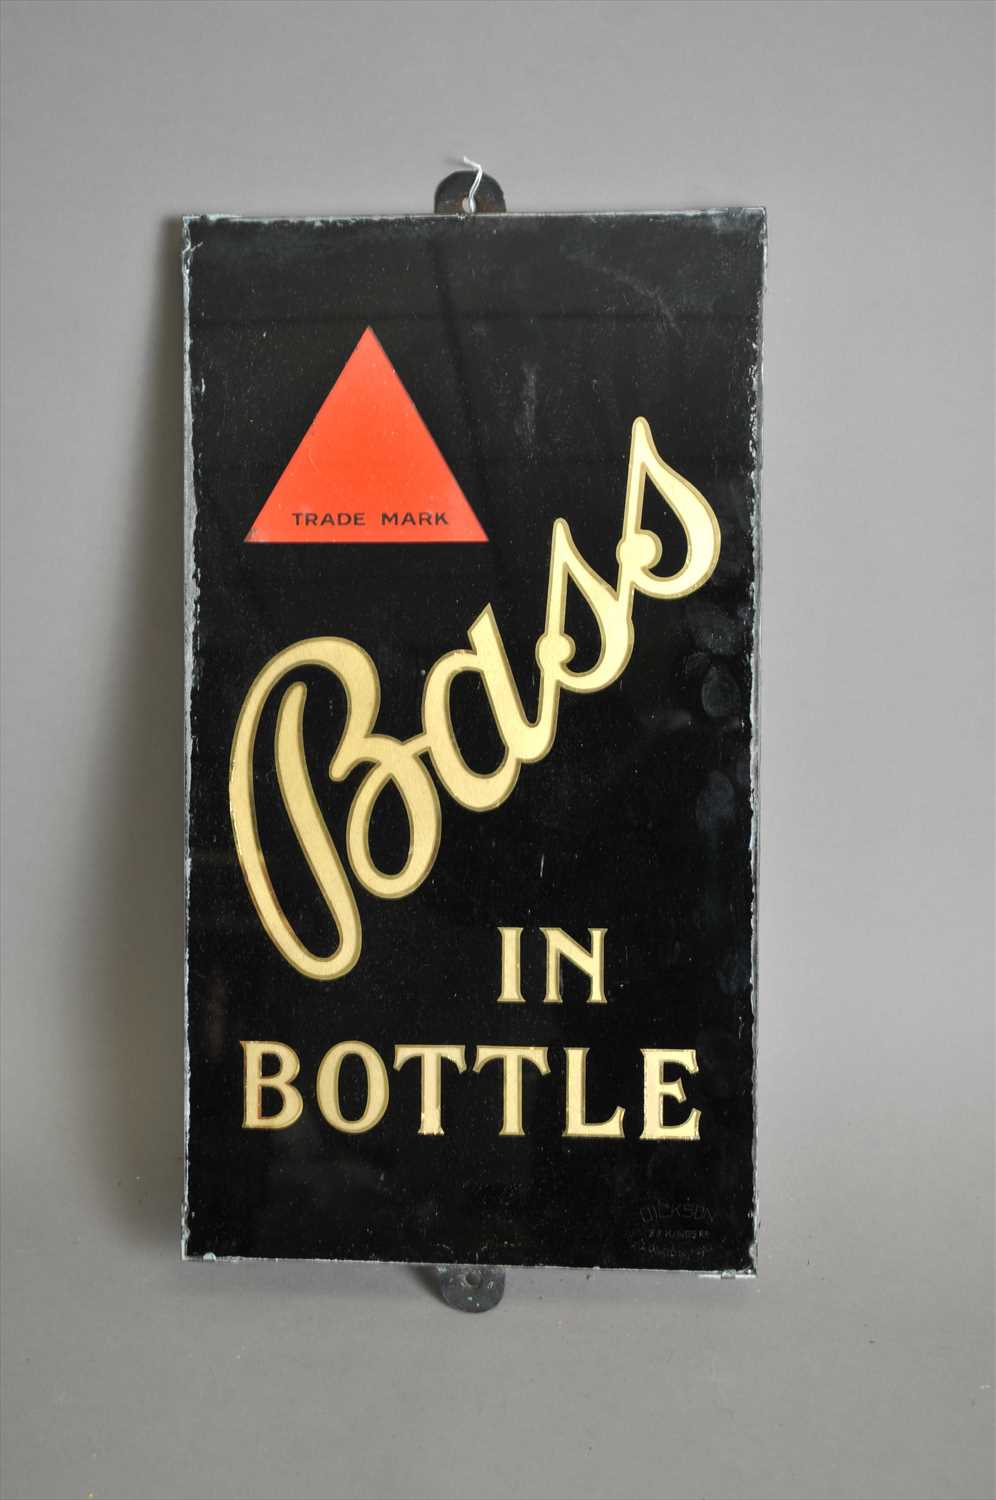 Lot 632 - An original slate-backed glass pub advertising sign for 'Bass In Bottle' by Dickson, London